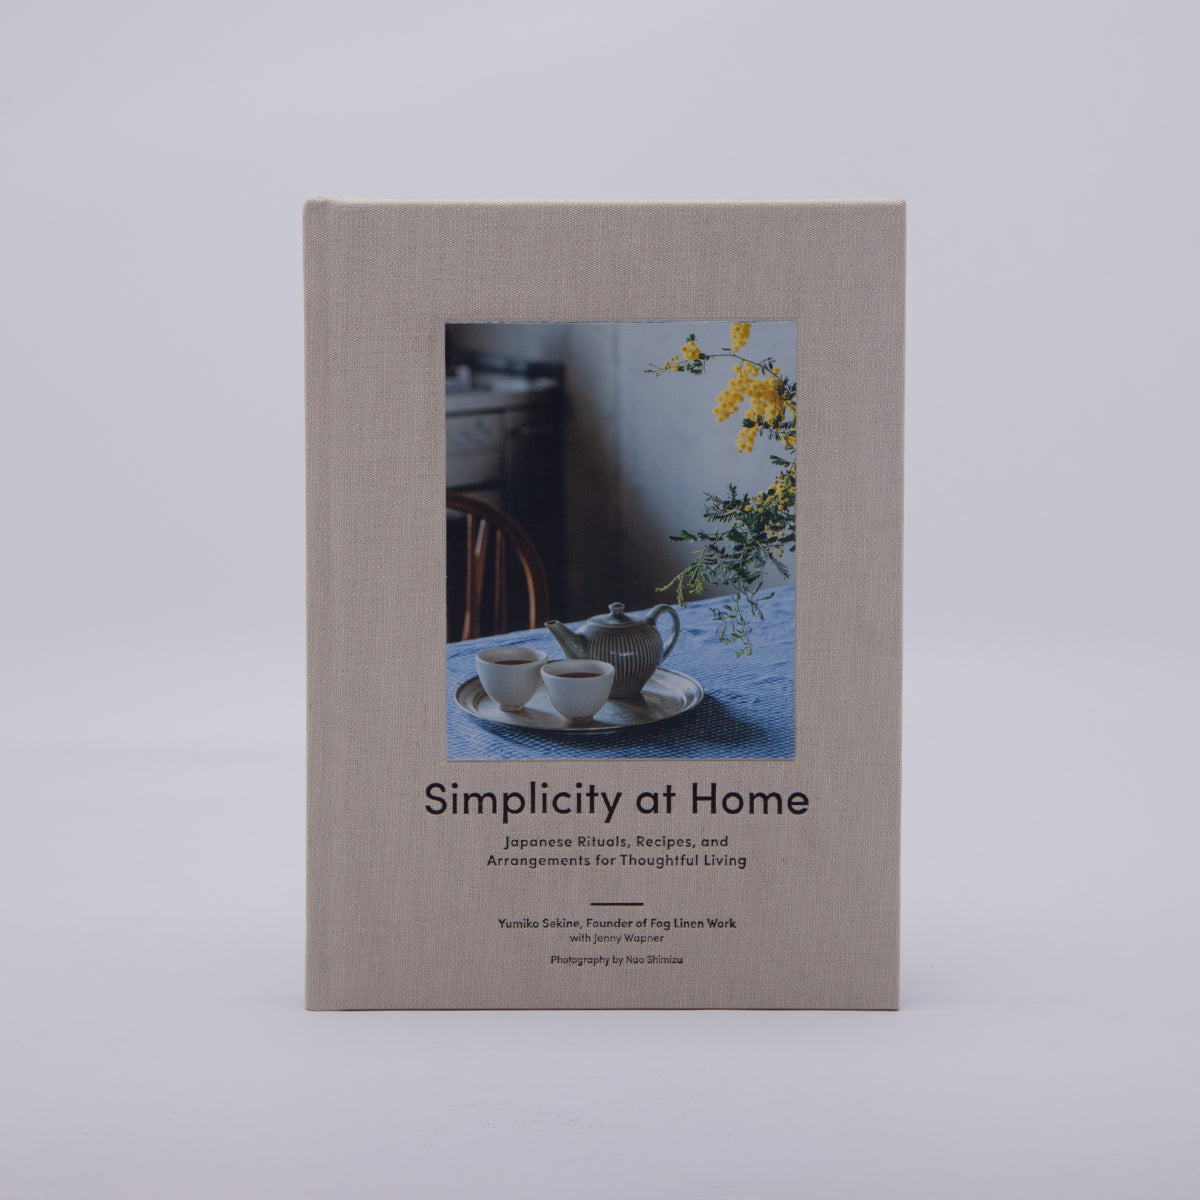 Simplicity at Home | Japanese Rituals, Recipes & Arrangements for Thoughtful Living